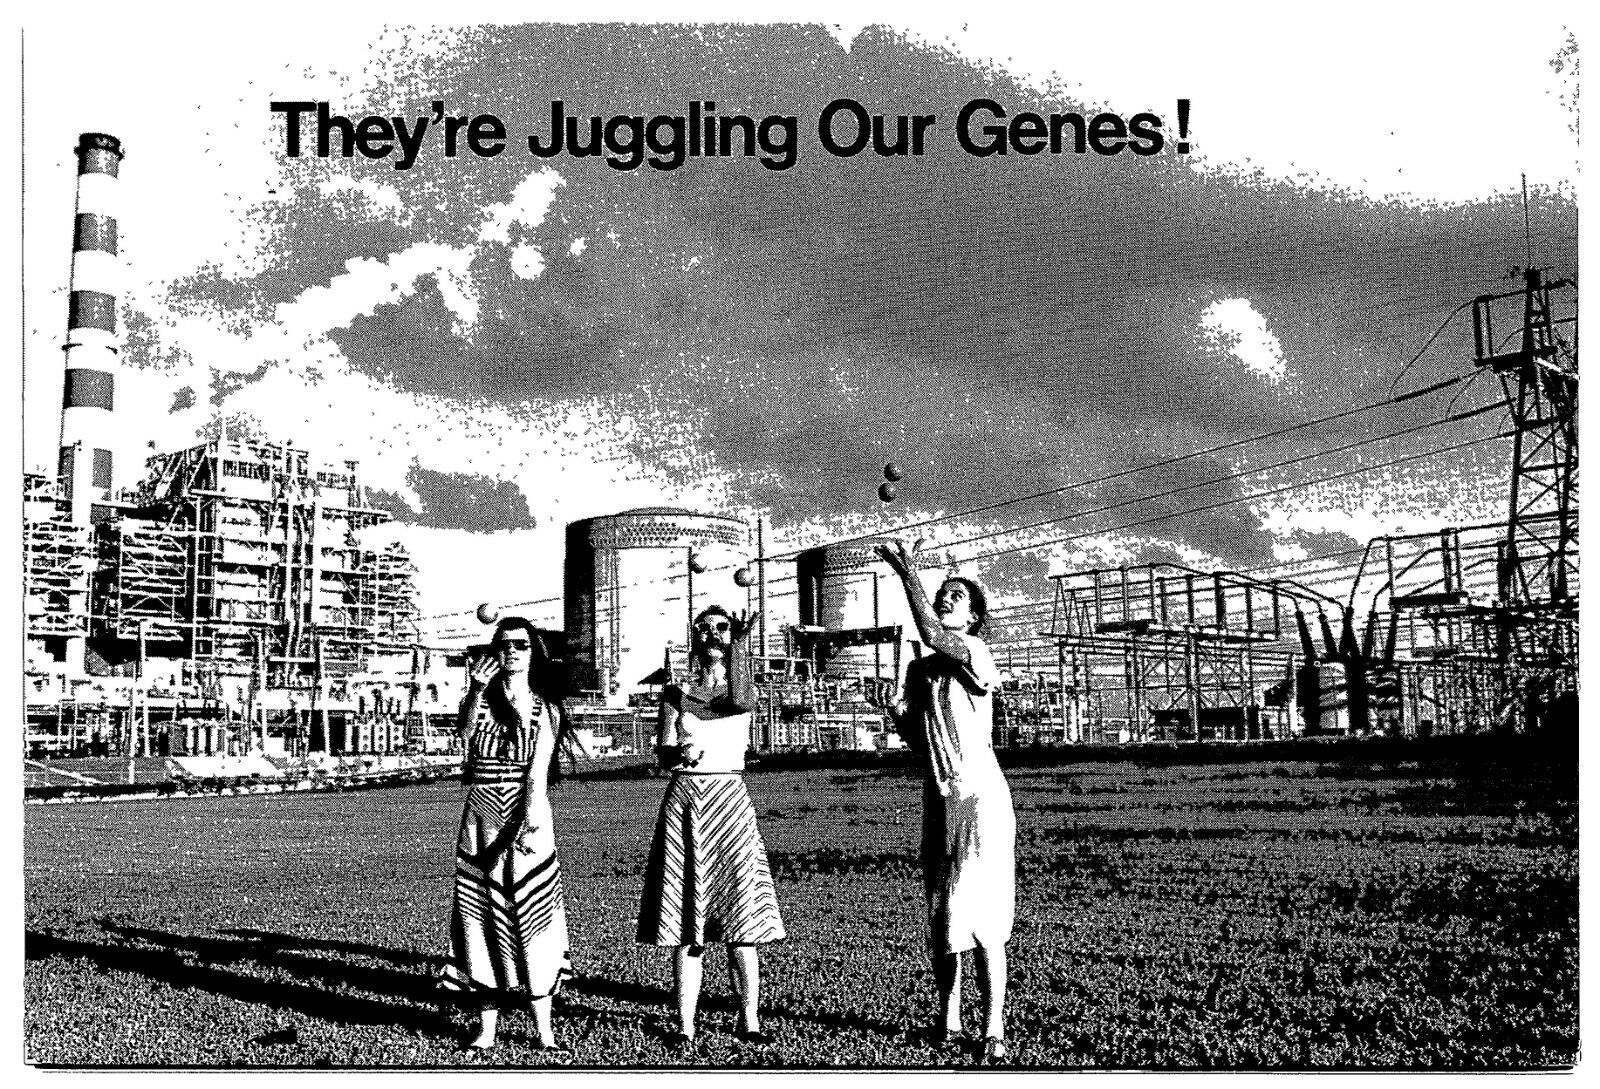 They're Juggling Our Genes, Nuclear Free World - Postcard 